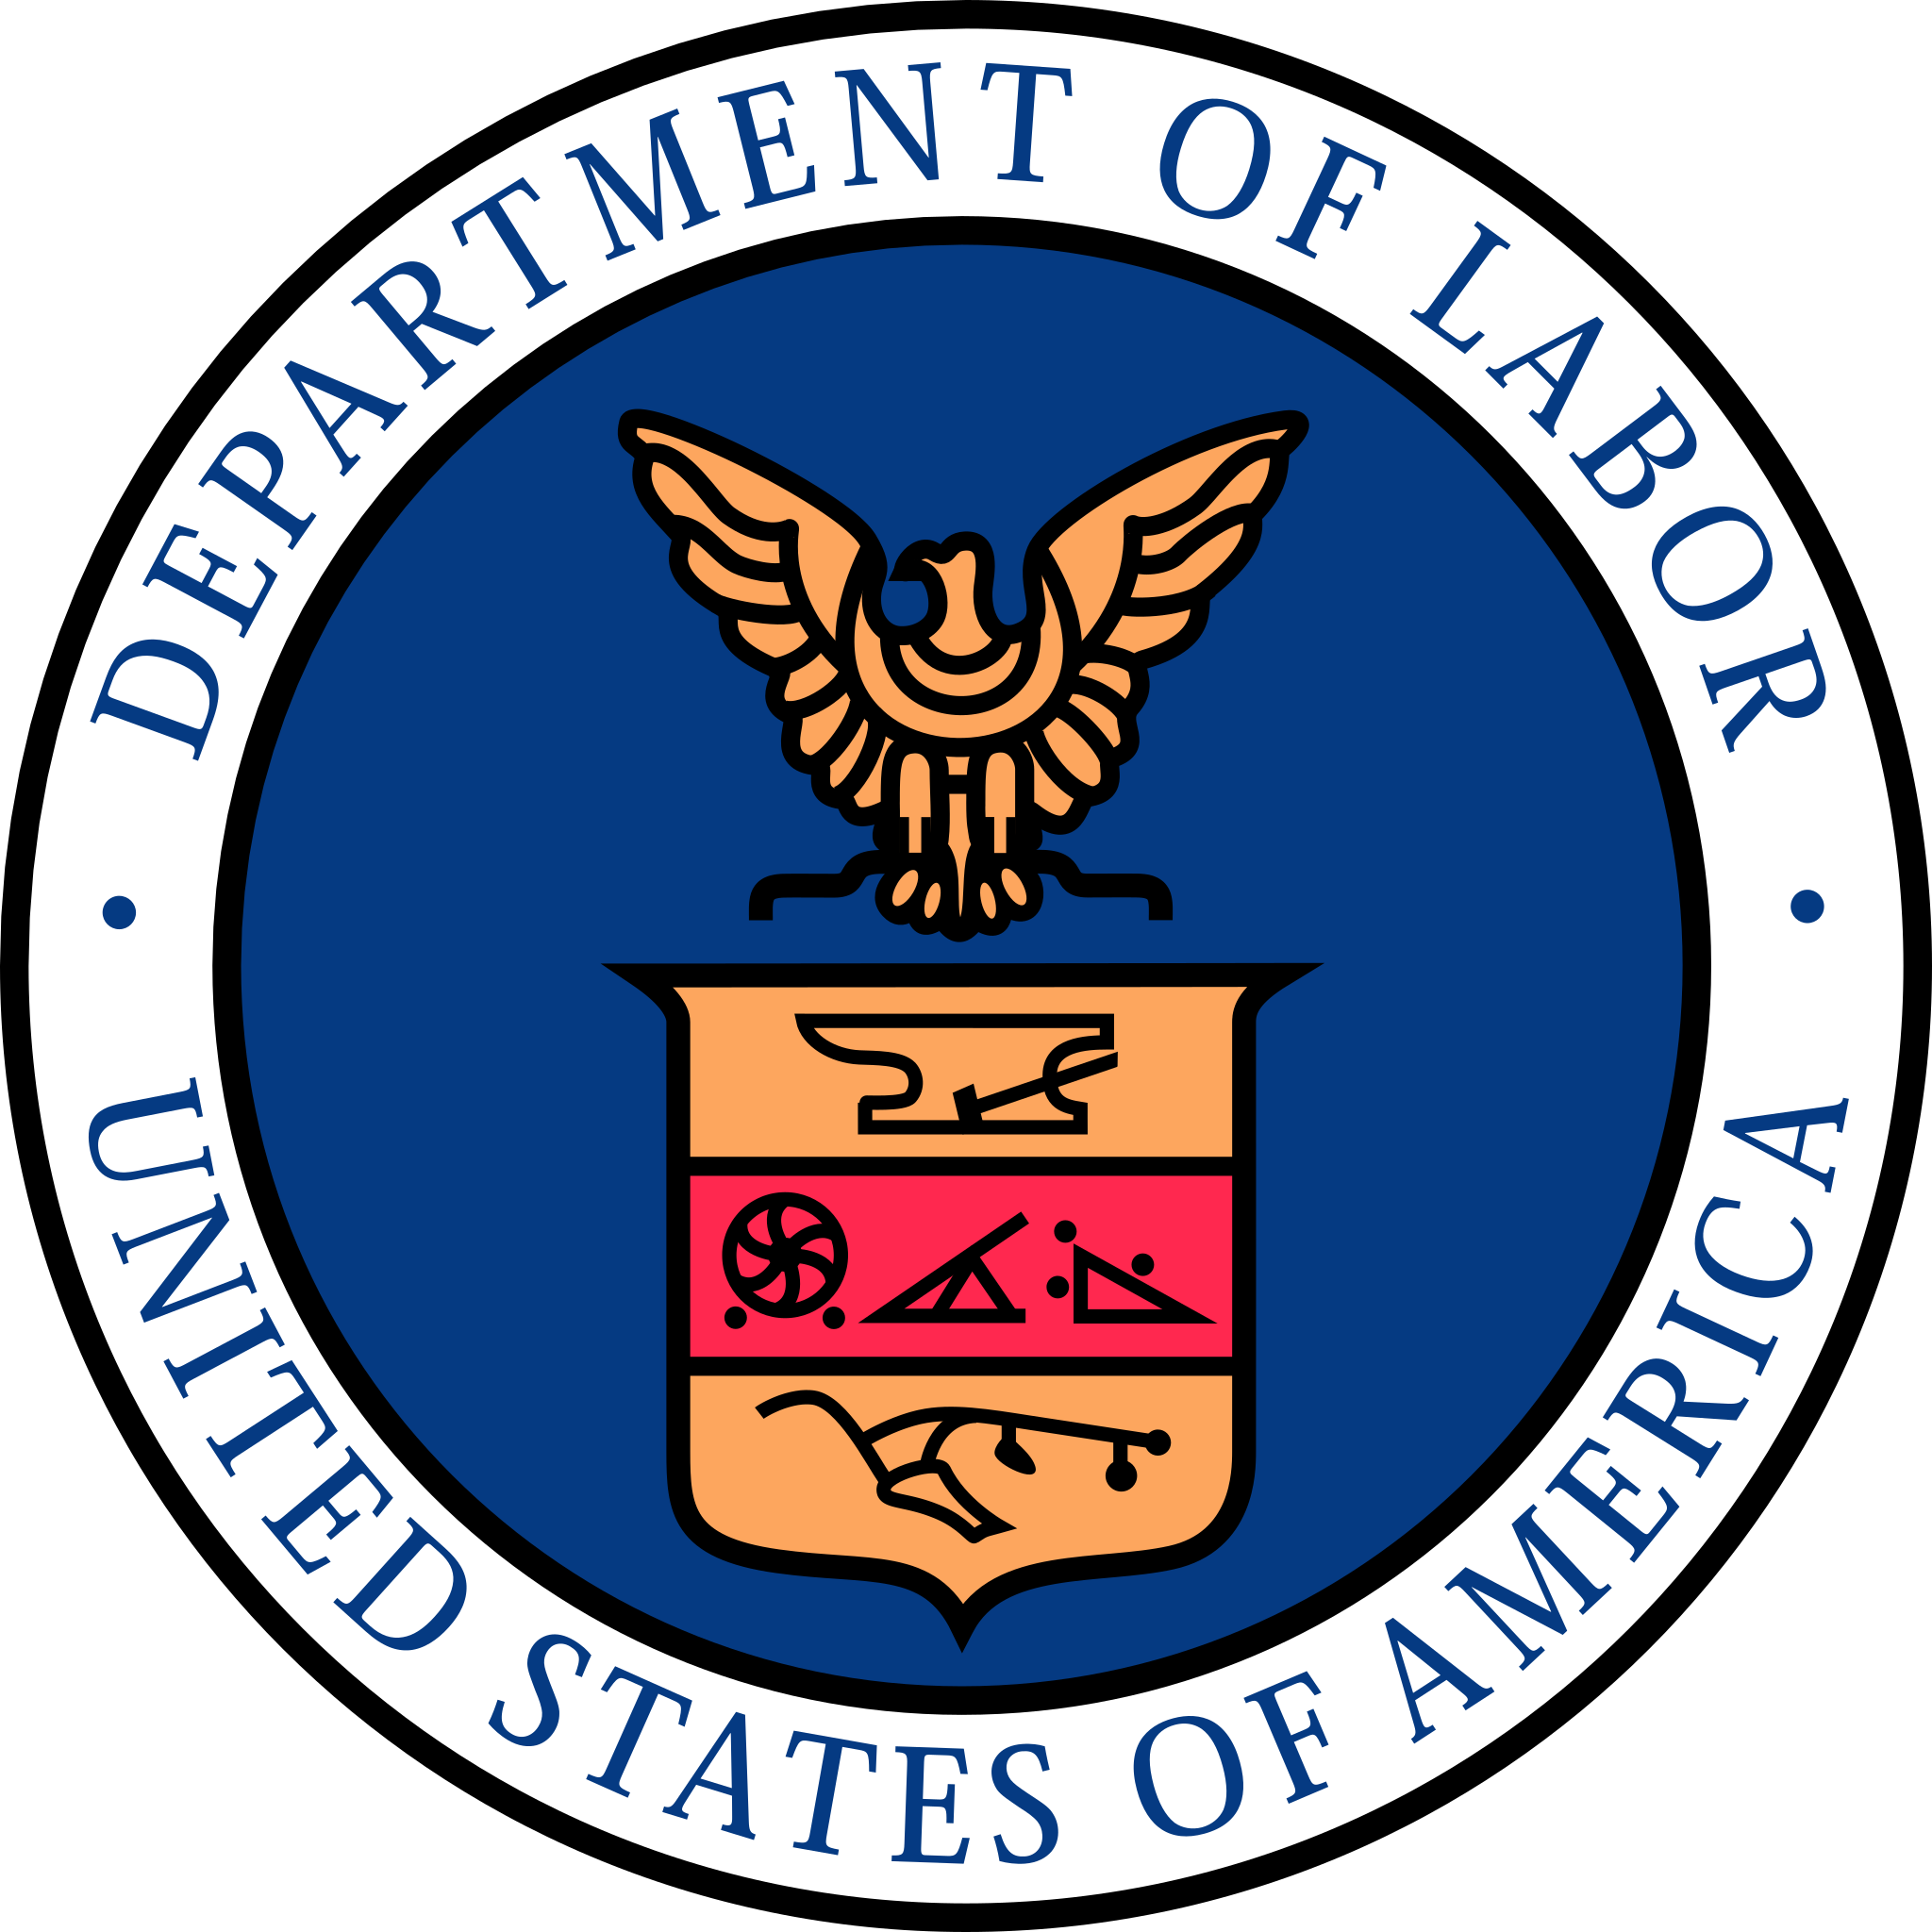 United Stated Department of Labor seal